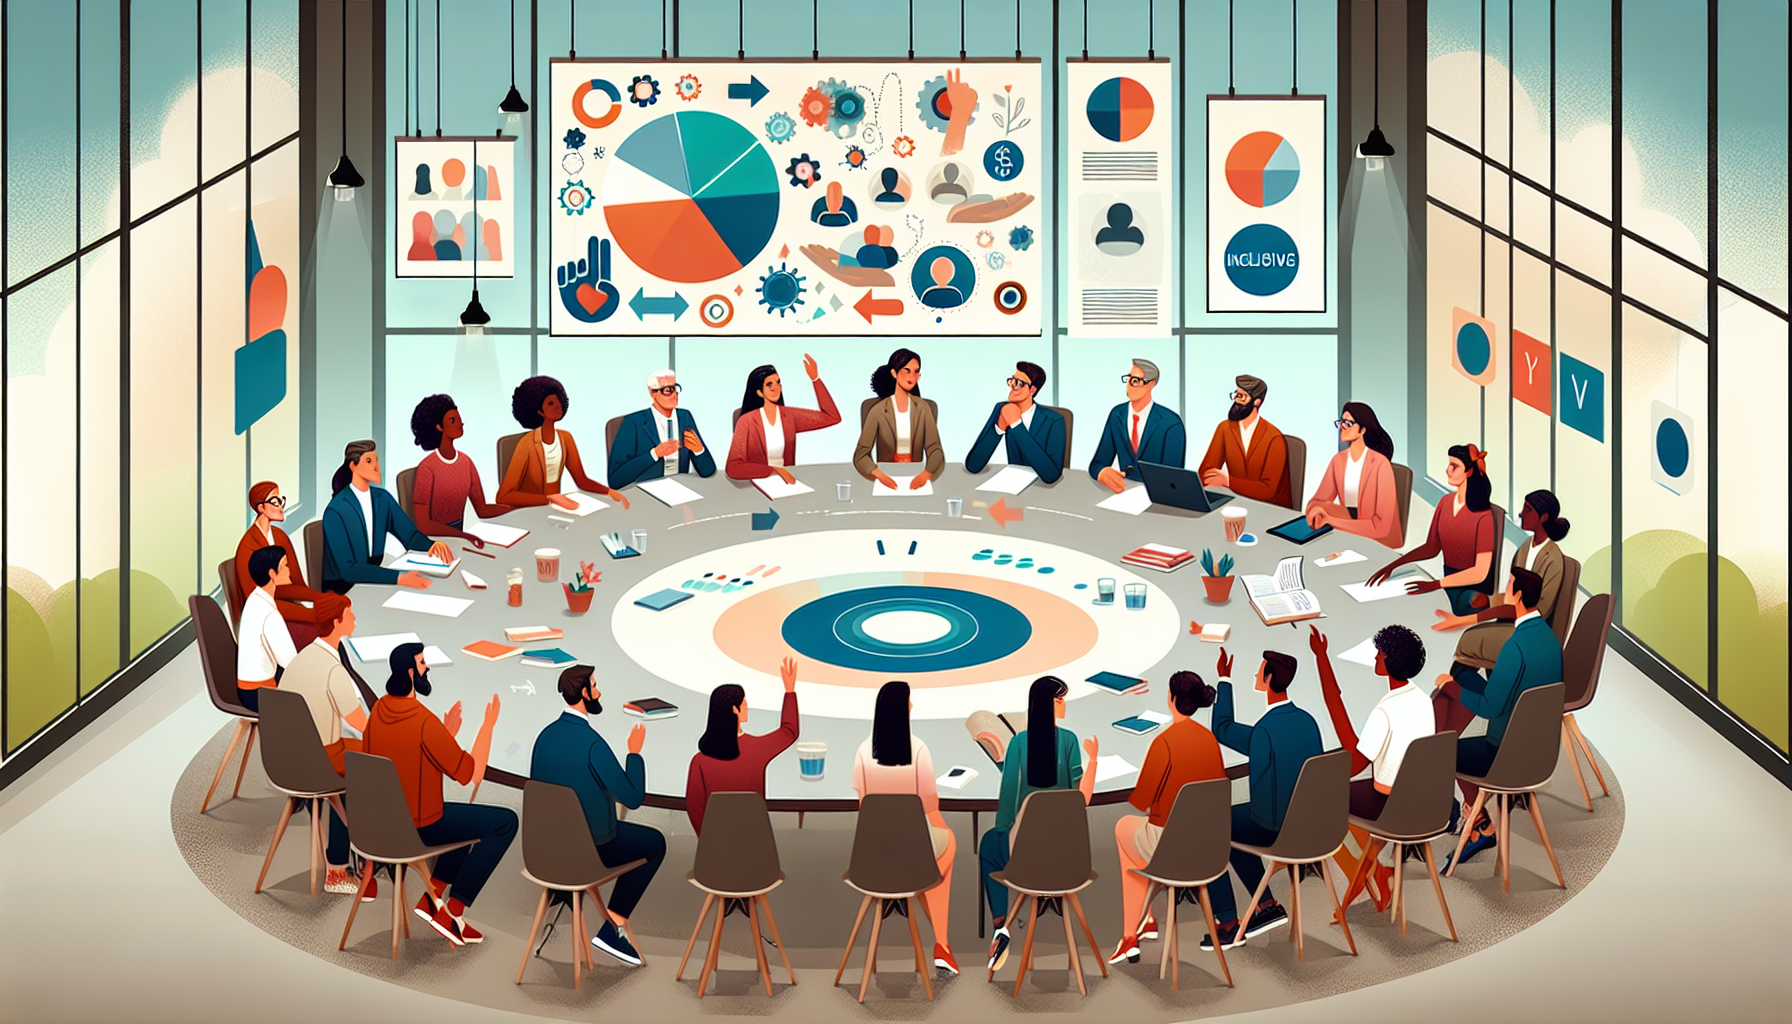 Illustration of a group of diverse employees discussing company policies and values